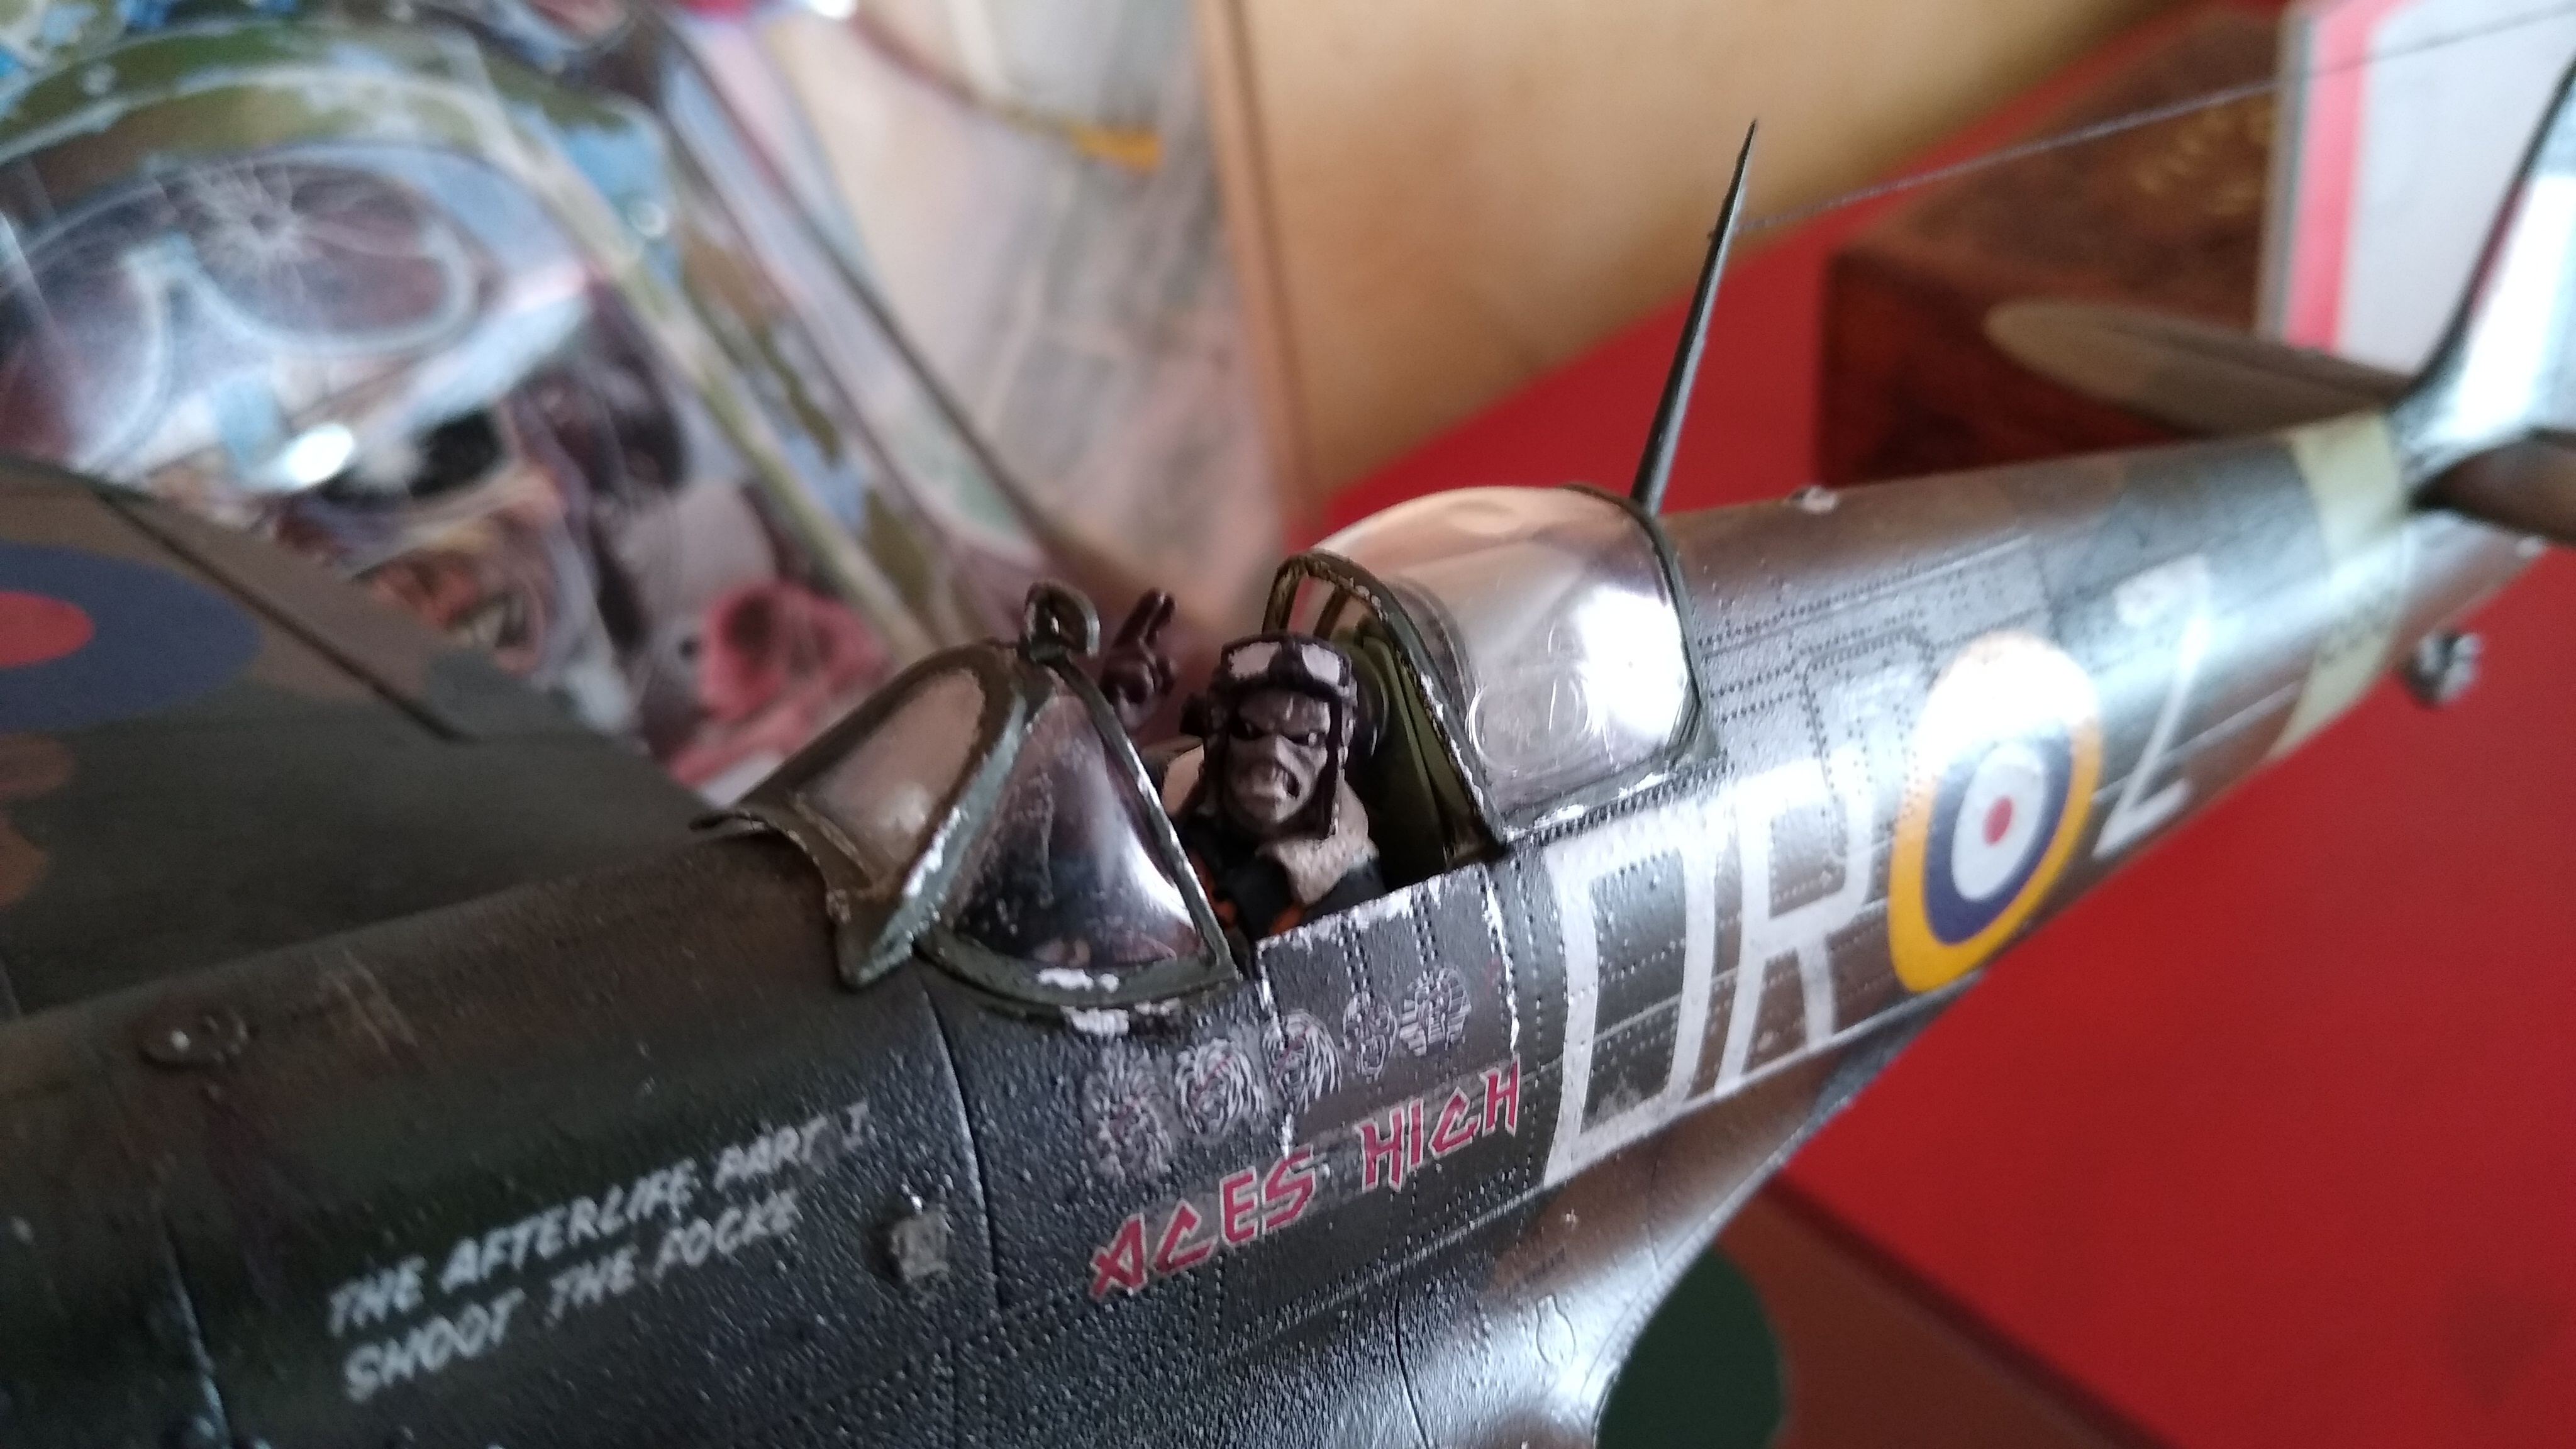 Spitfire Mk2 Iron Maiden "Aces High" Mbke